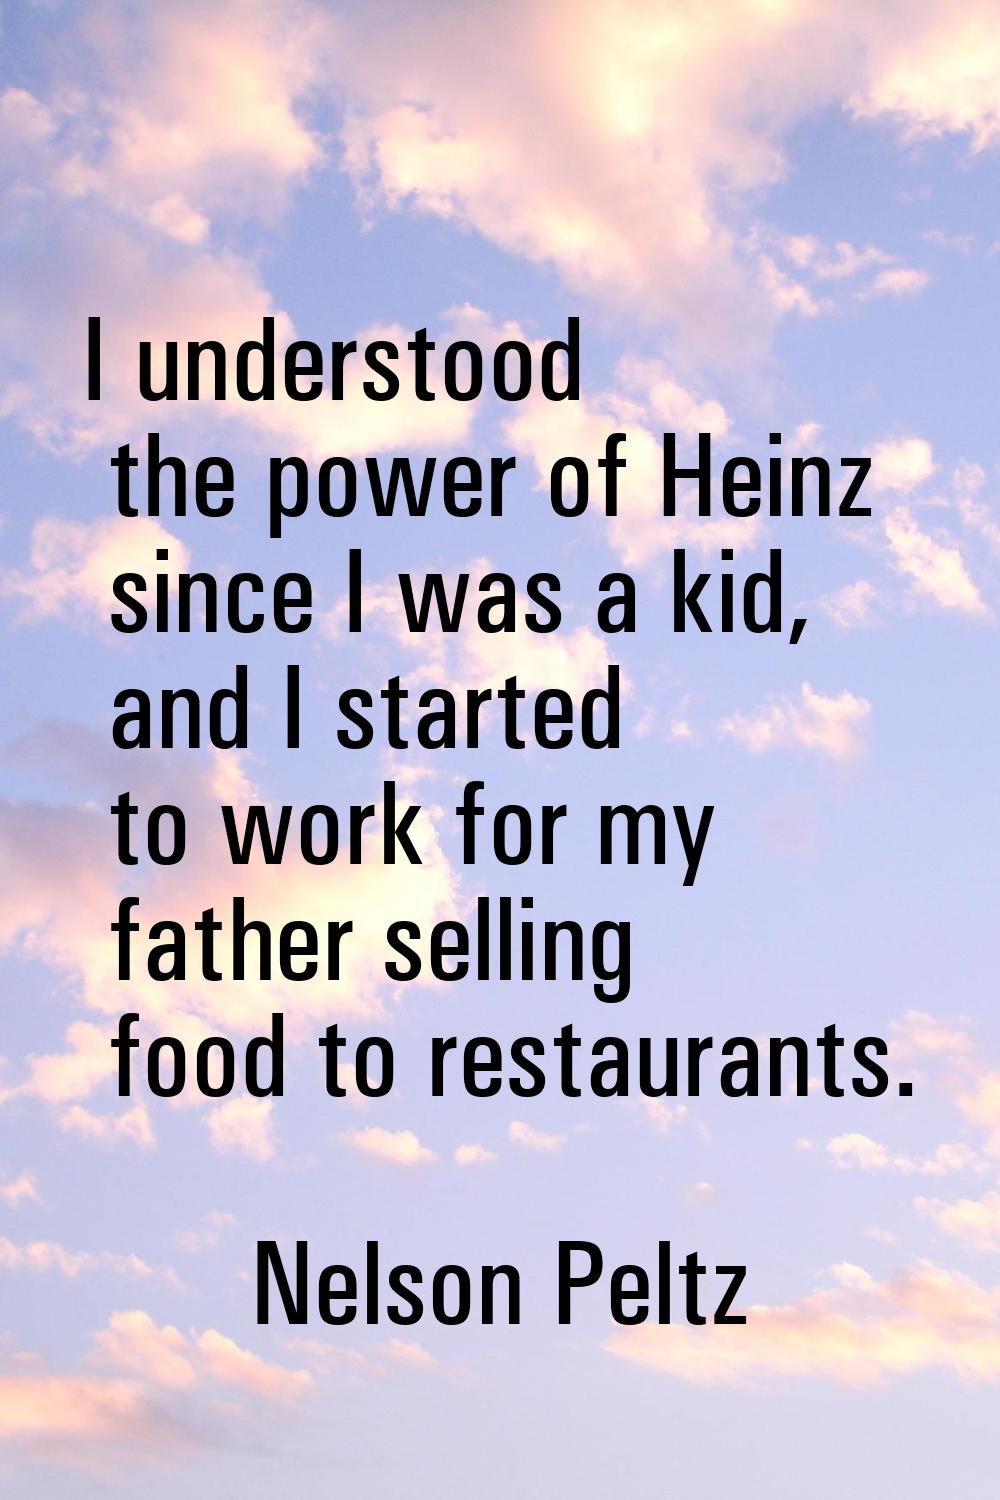 I understood the power of Heinz since I was a kid, and I started to work for my father selling food